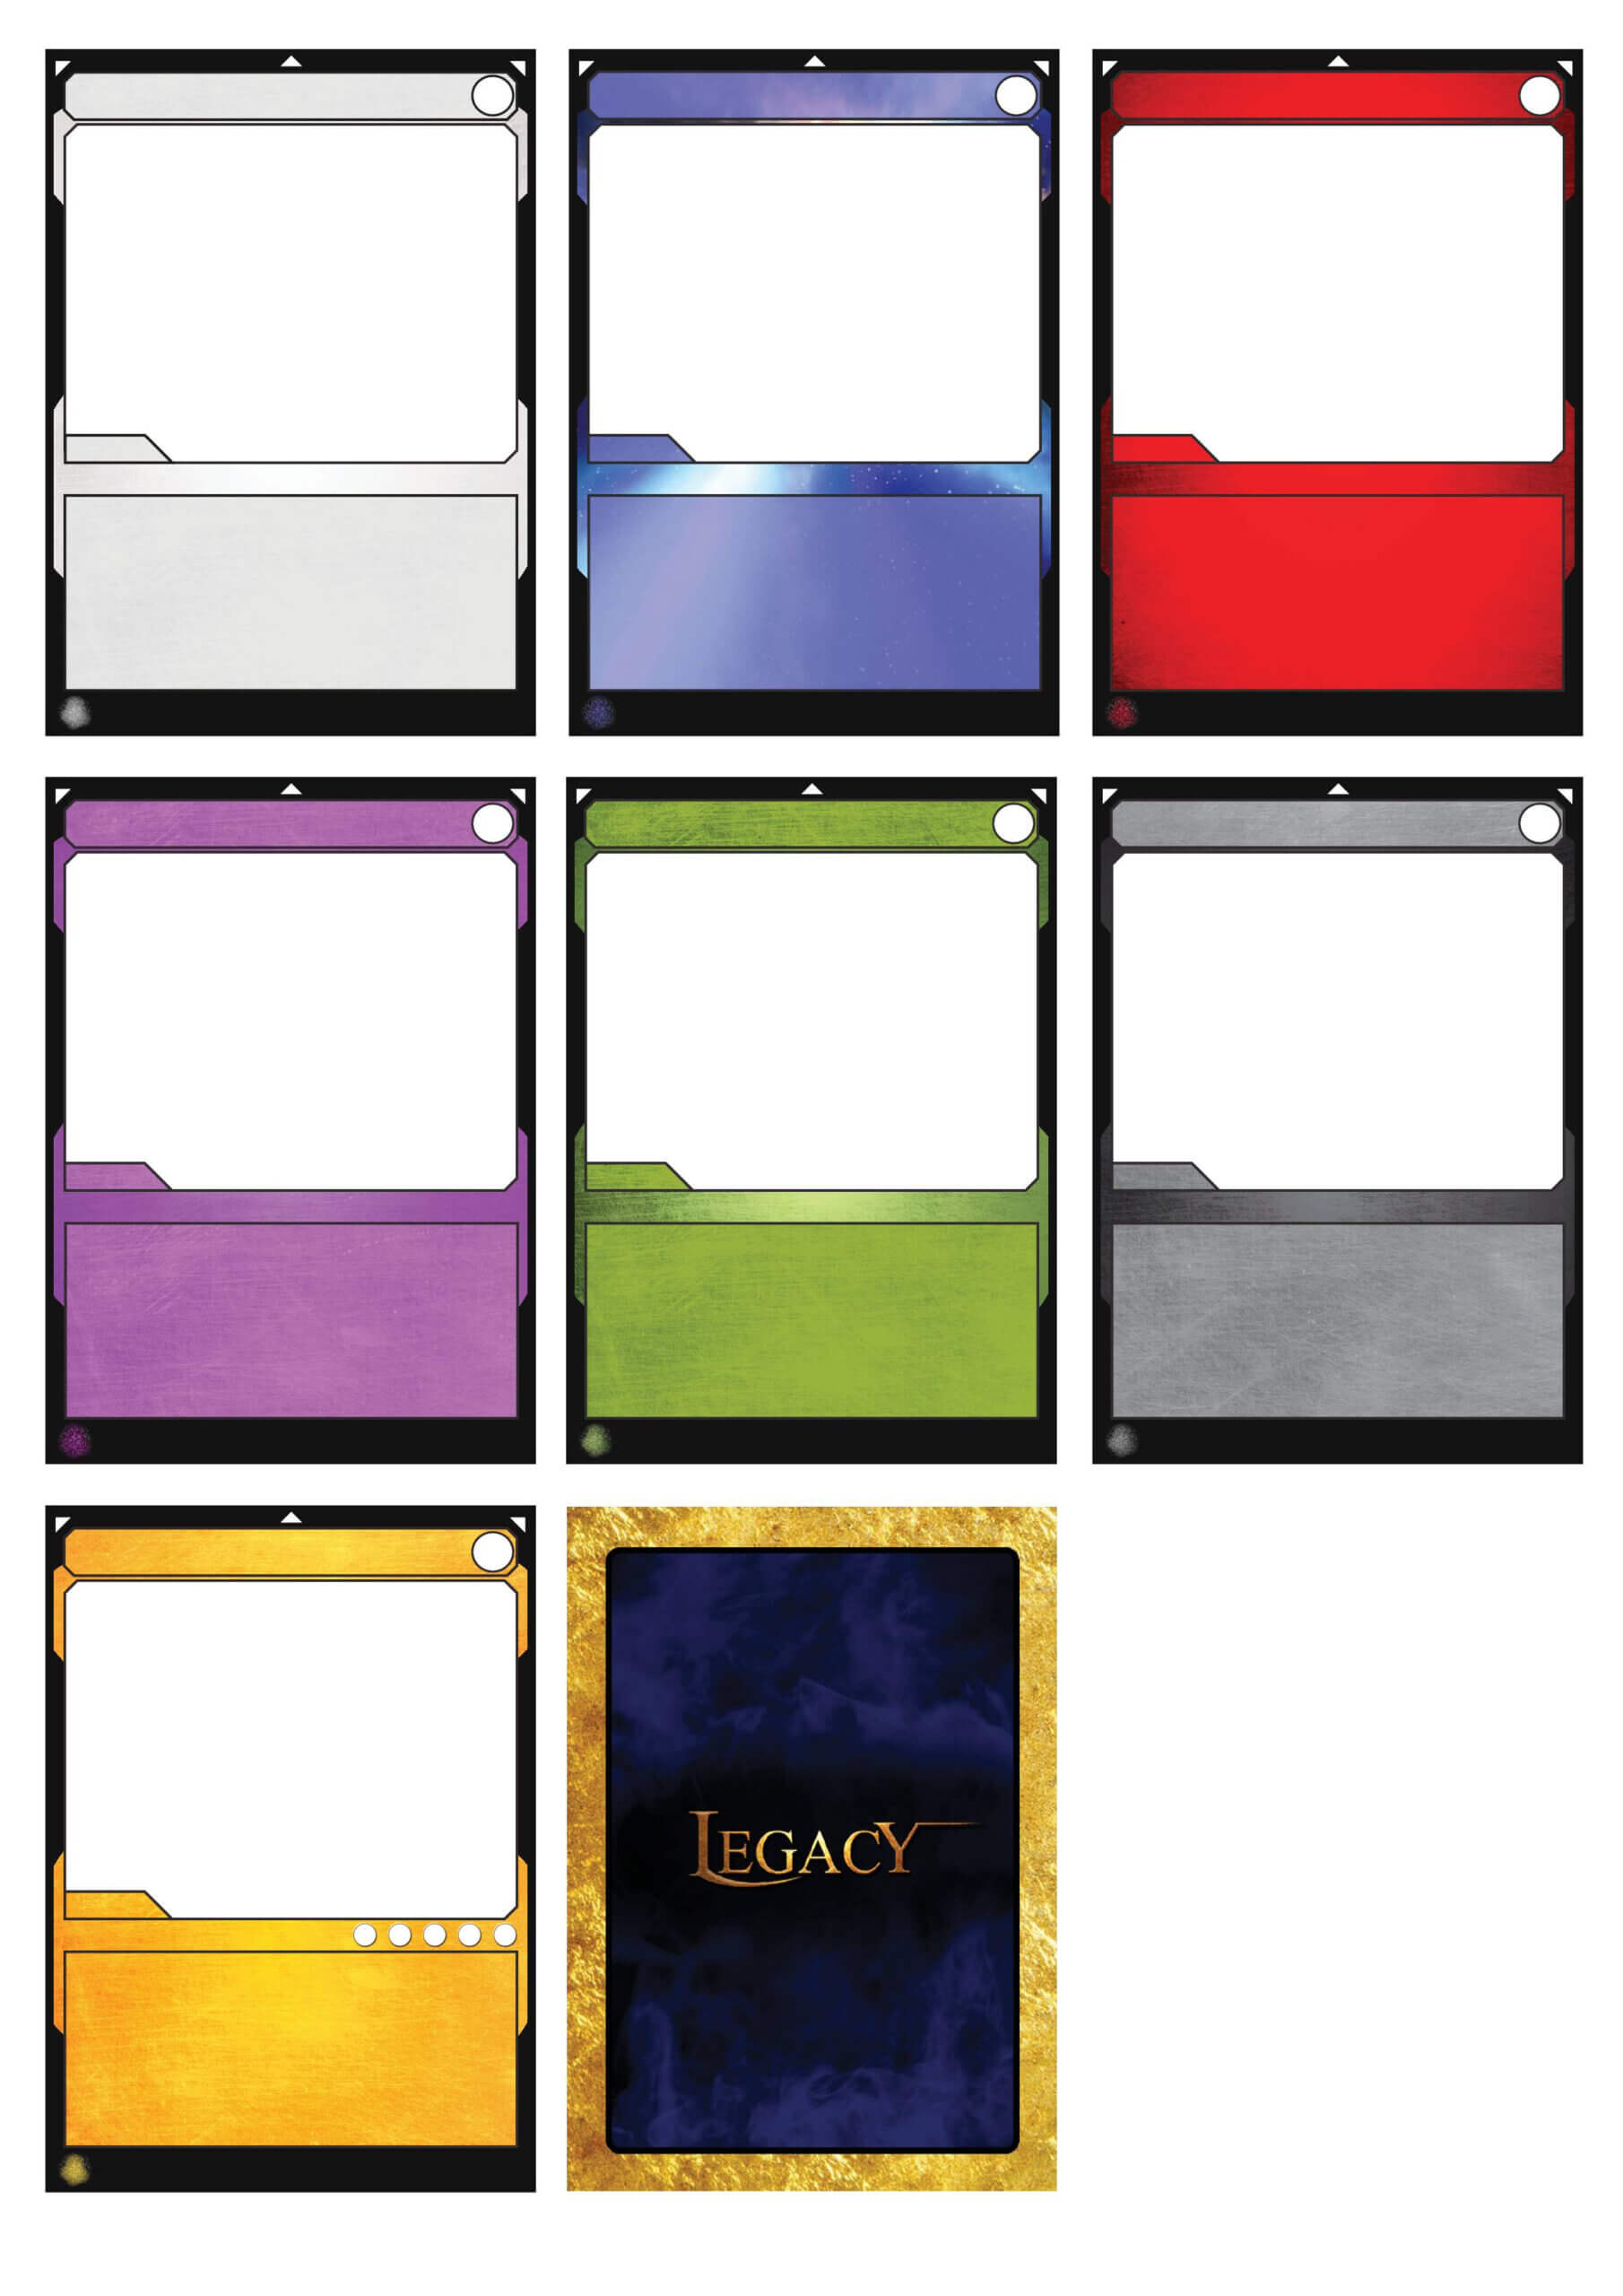 025 Template Ideas Board Game Cards 314204 Free Trading Card Intended For Card Game Template Maker